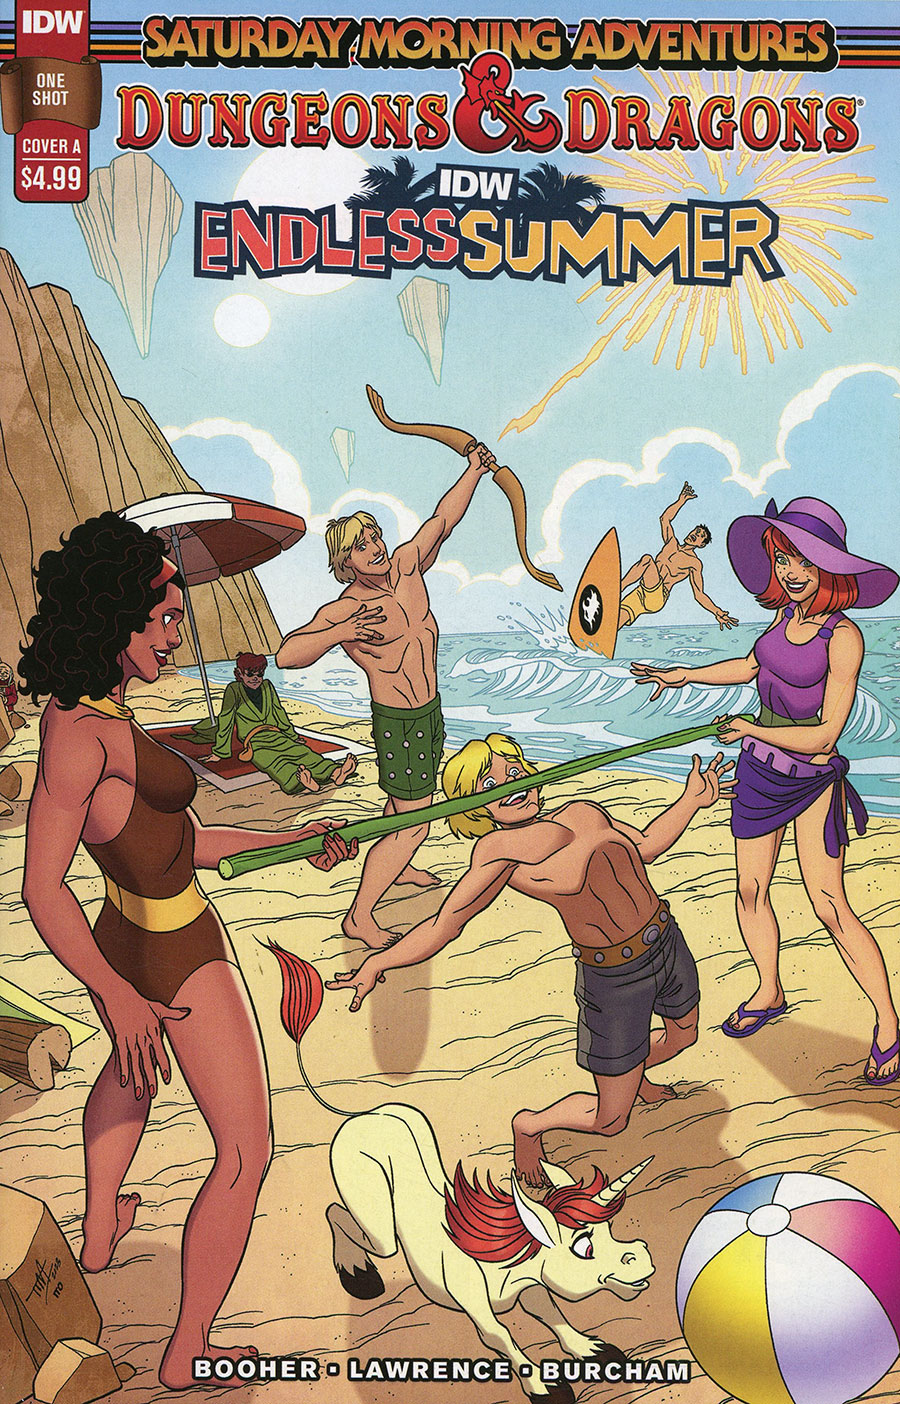 IDW Endless Summer Dungeons & Dragons Saturday Morning Adventures #1 (One Shot) Cover A Regular Tim Levins Cover